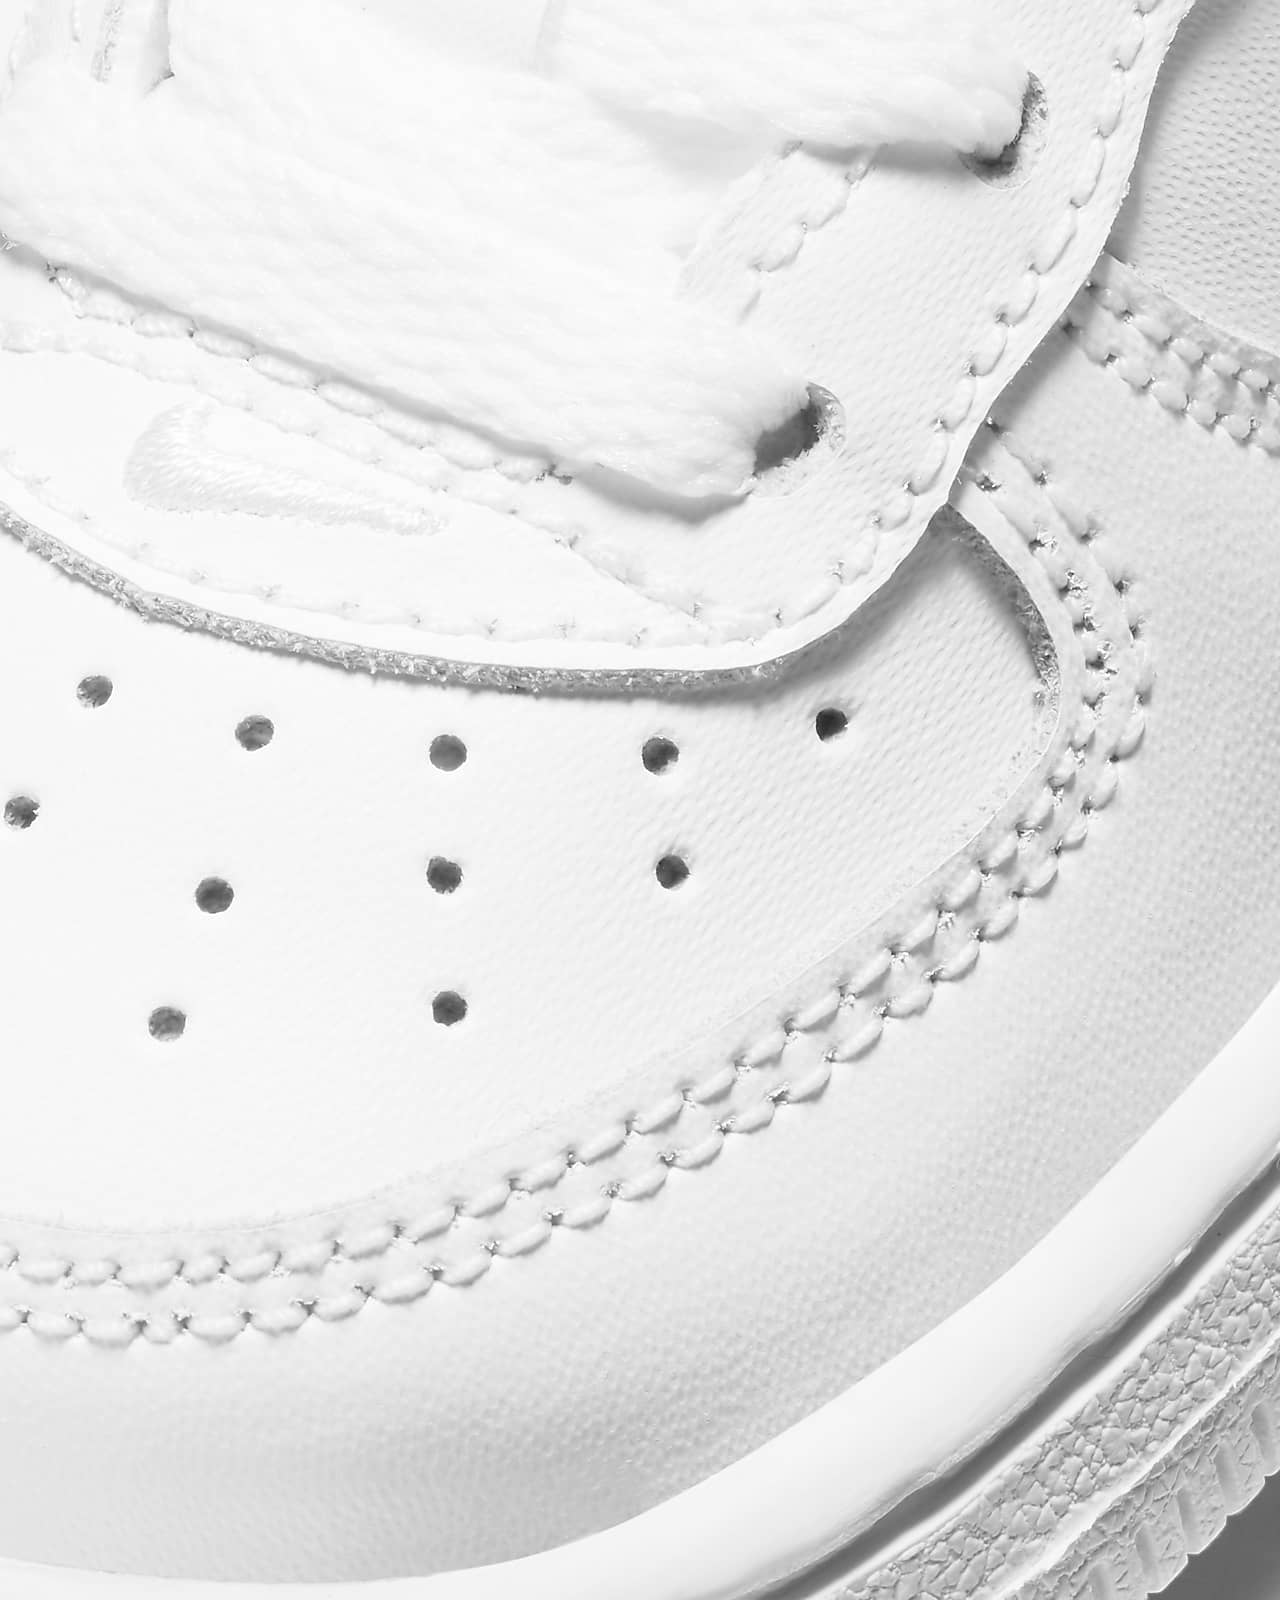 nike air force 1 baby sale